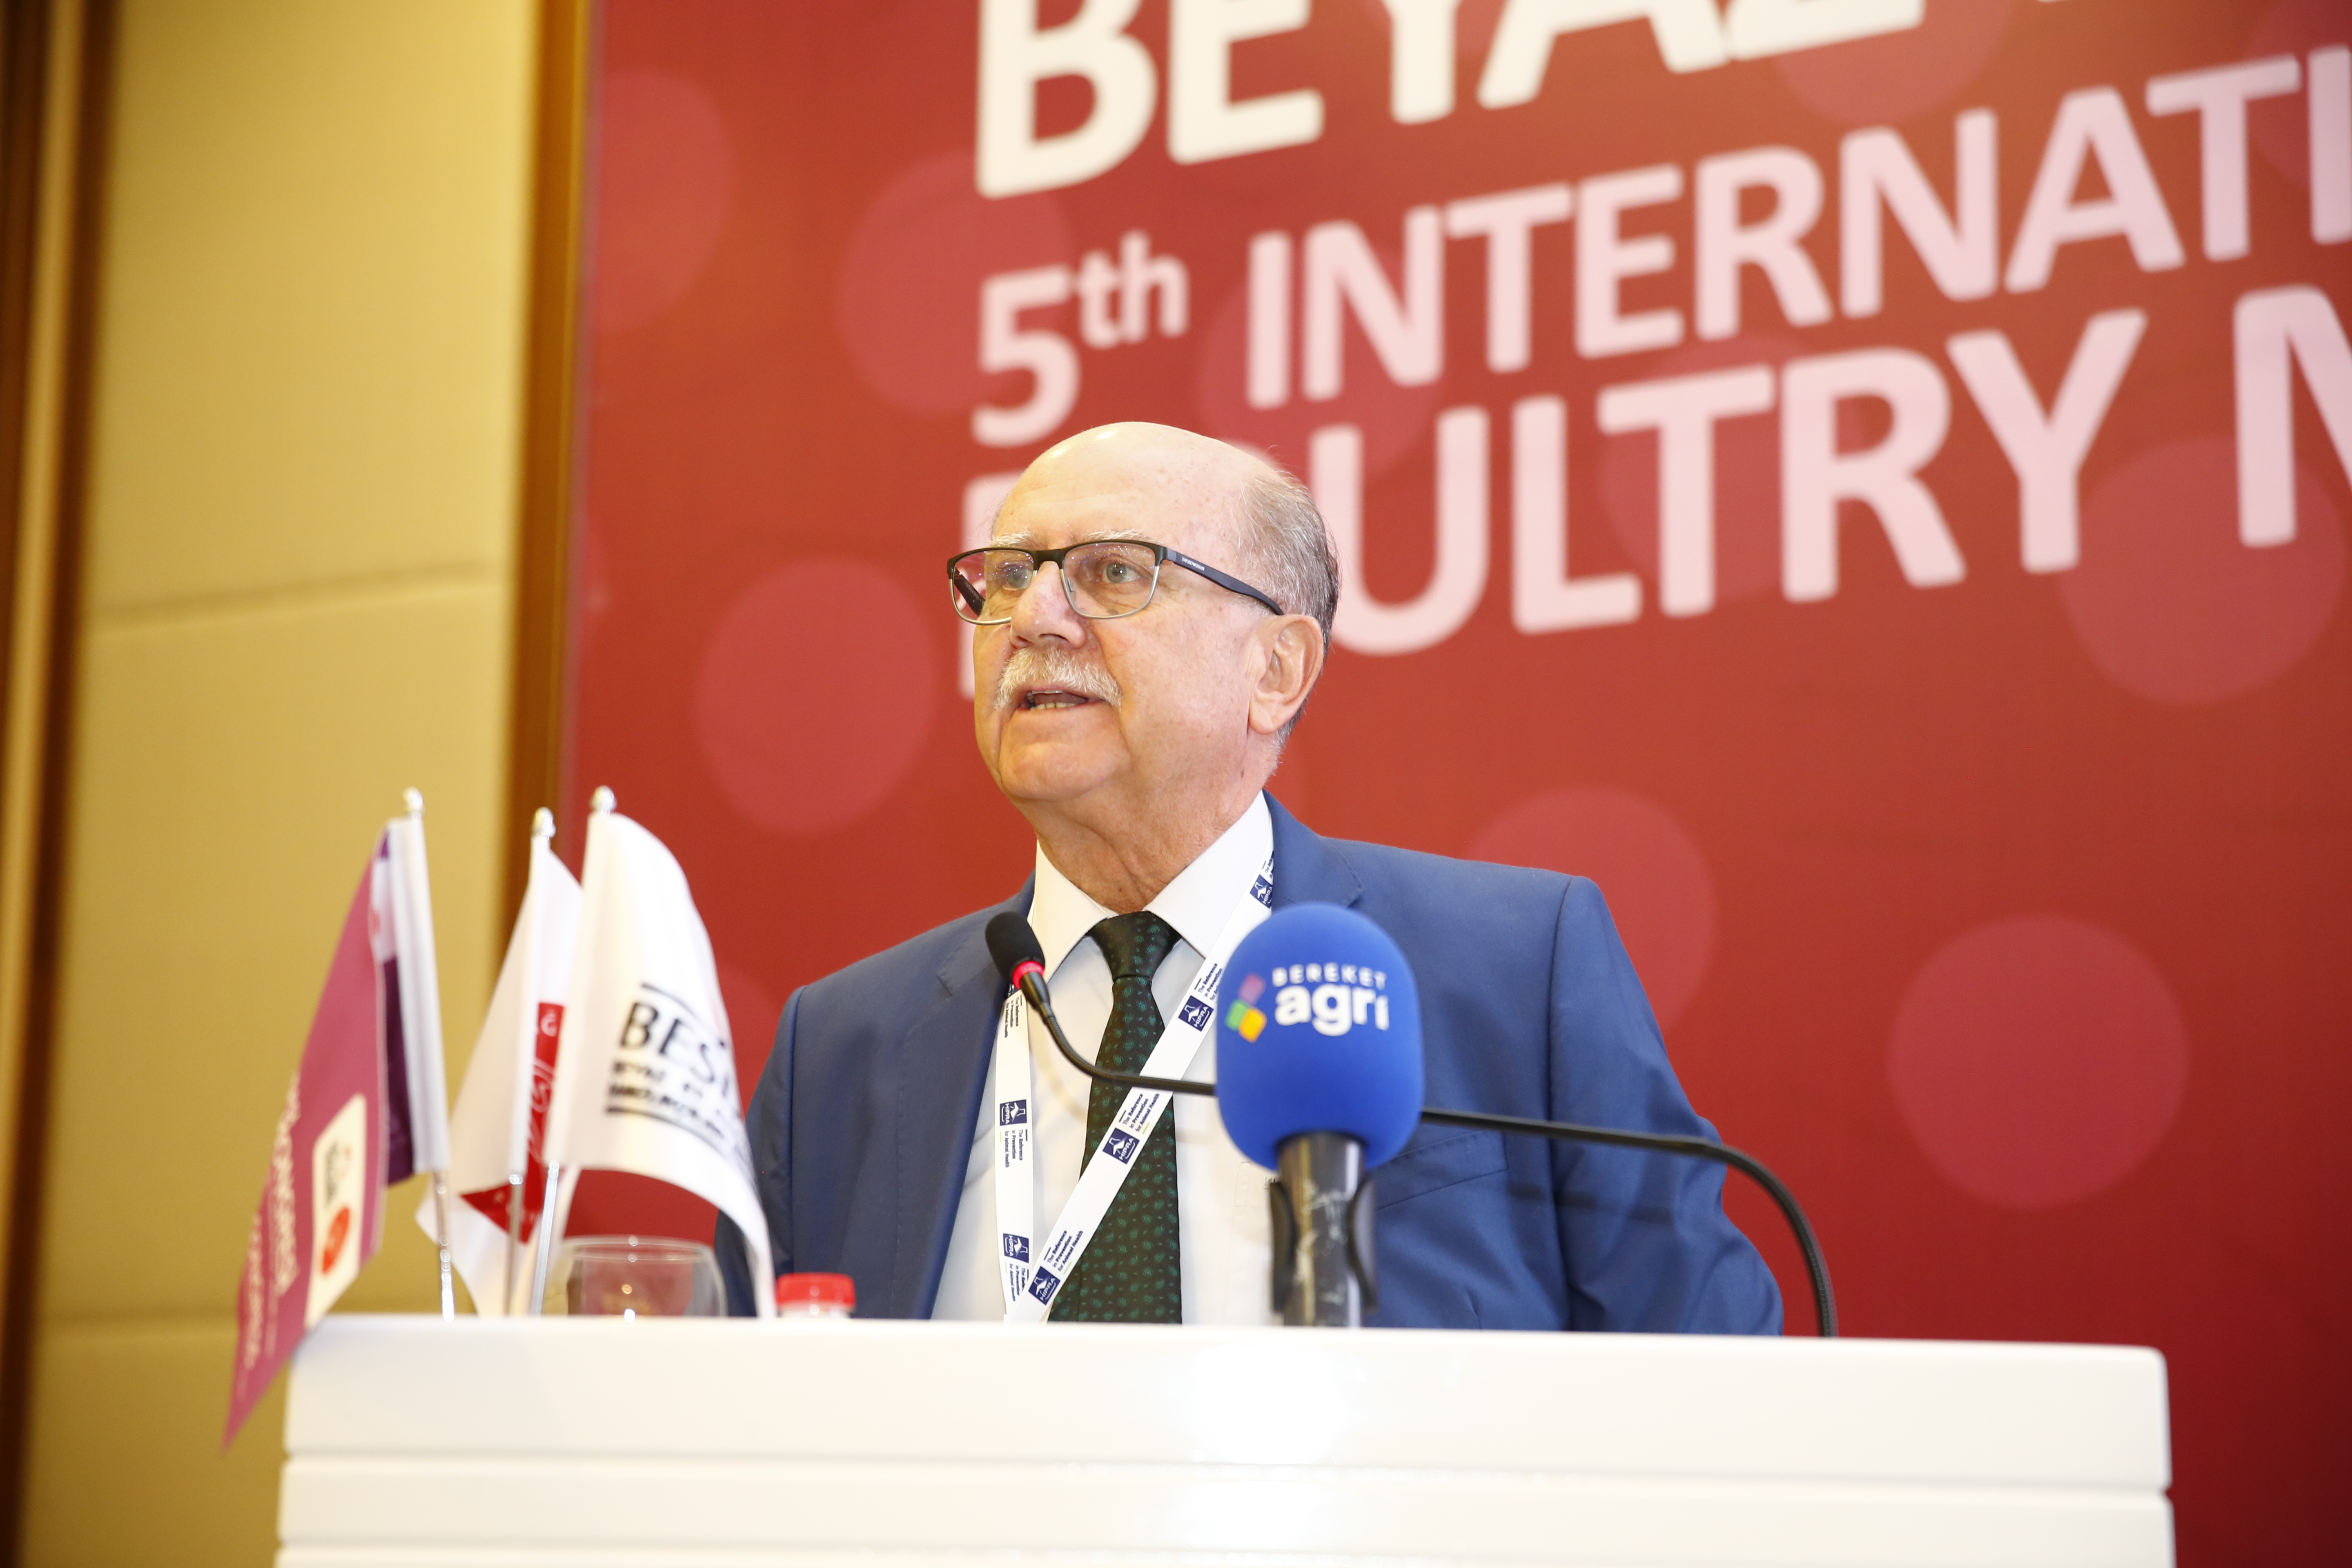 Poultry Meat Manufacturers and Breeders Association General Secretary Prof. Dr. Ahmet Ergun